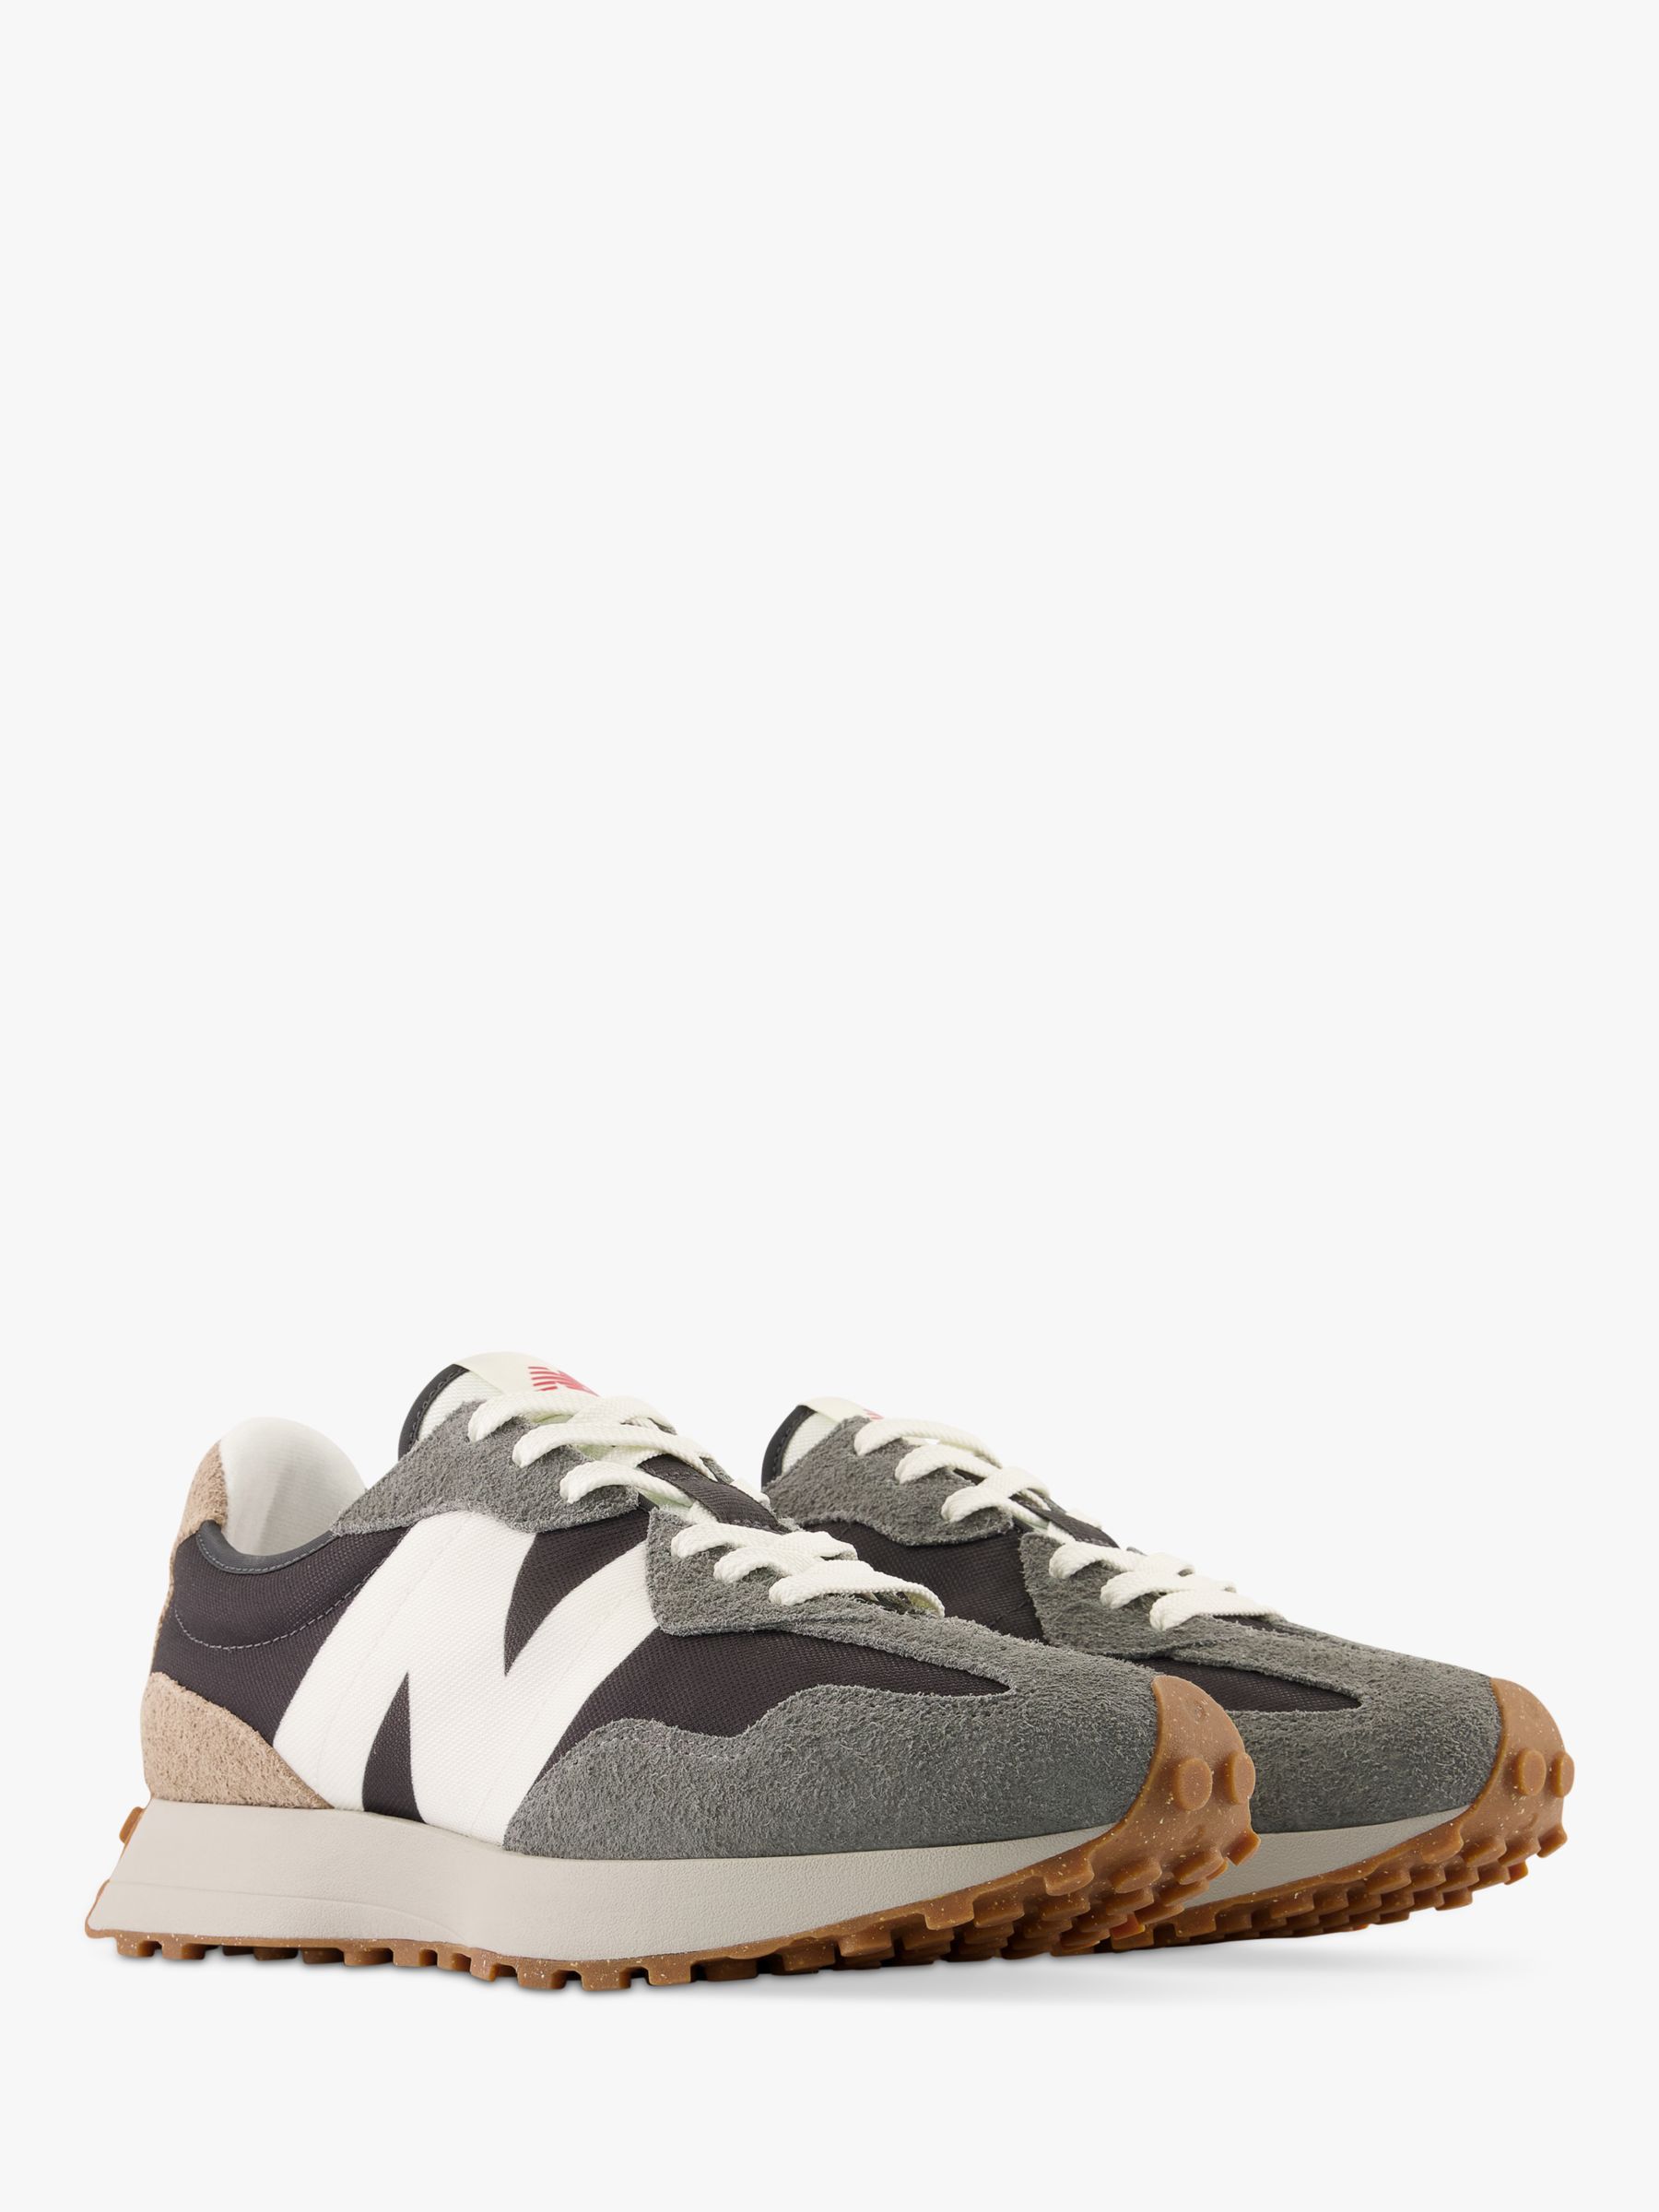 New Balance 327 Retro Suede Trainers, Harbour Grey, 7